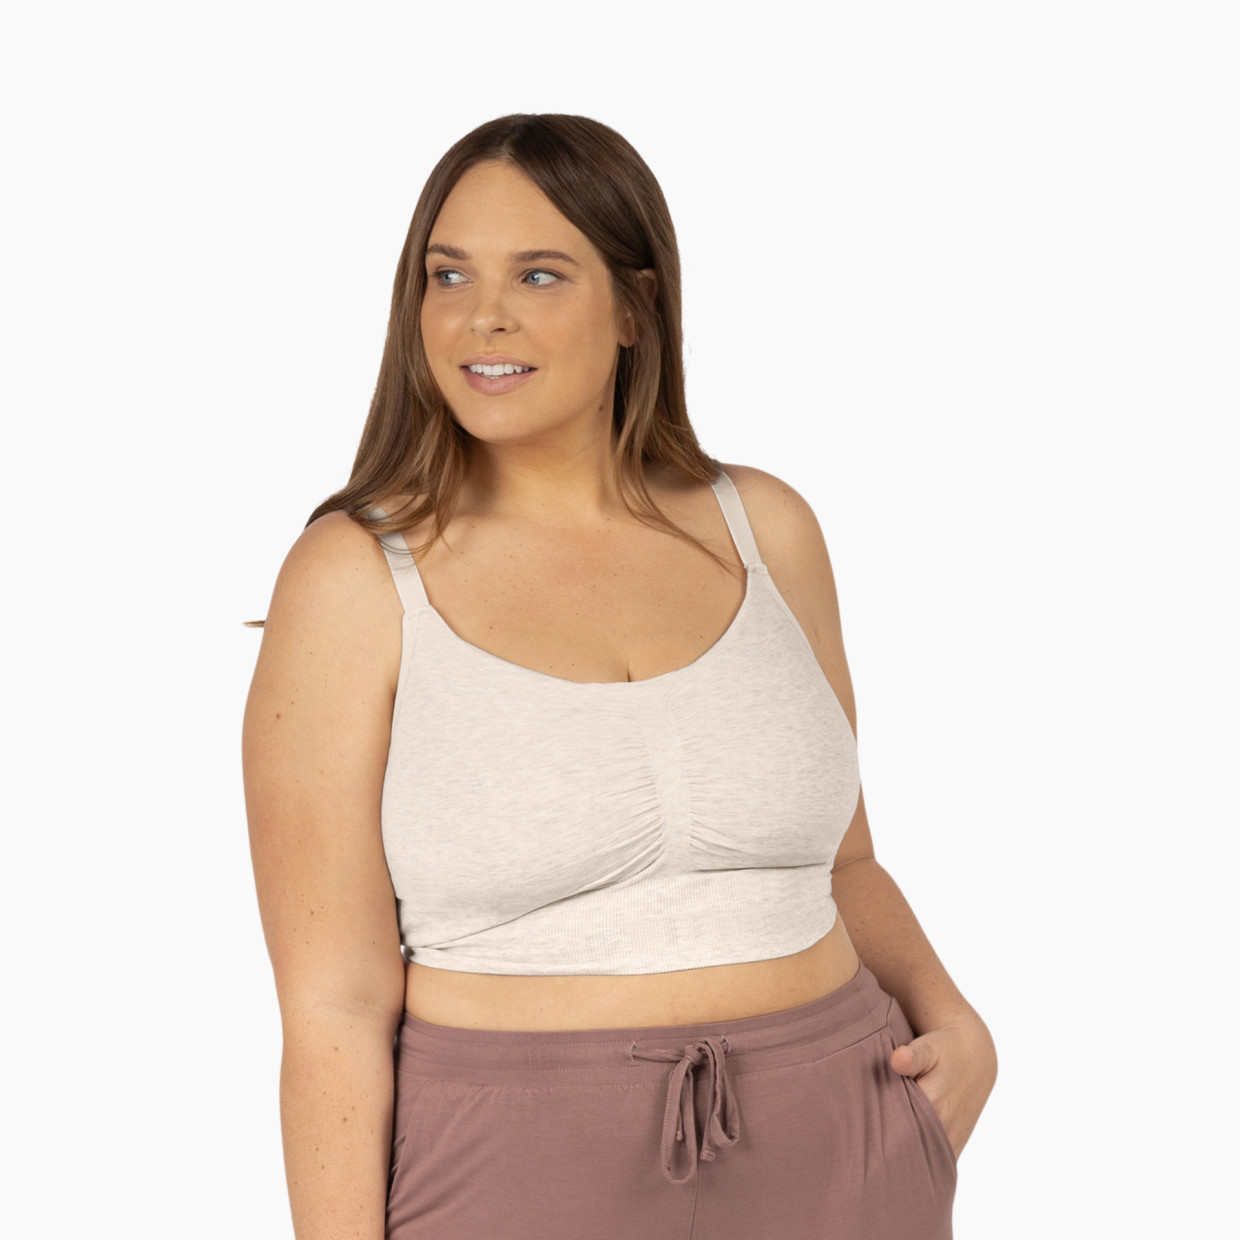 Kindred Bravely Sublime Bamboo Hands-Free Pumping Lounge & Sleep Bra - Oatmeal Heather, Medium-Busty.